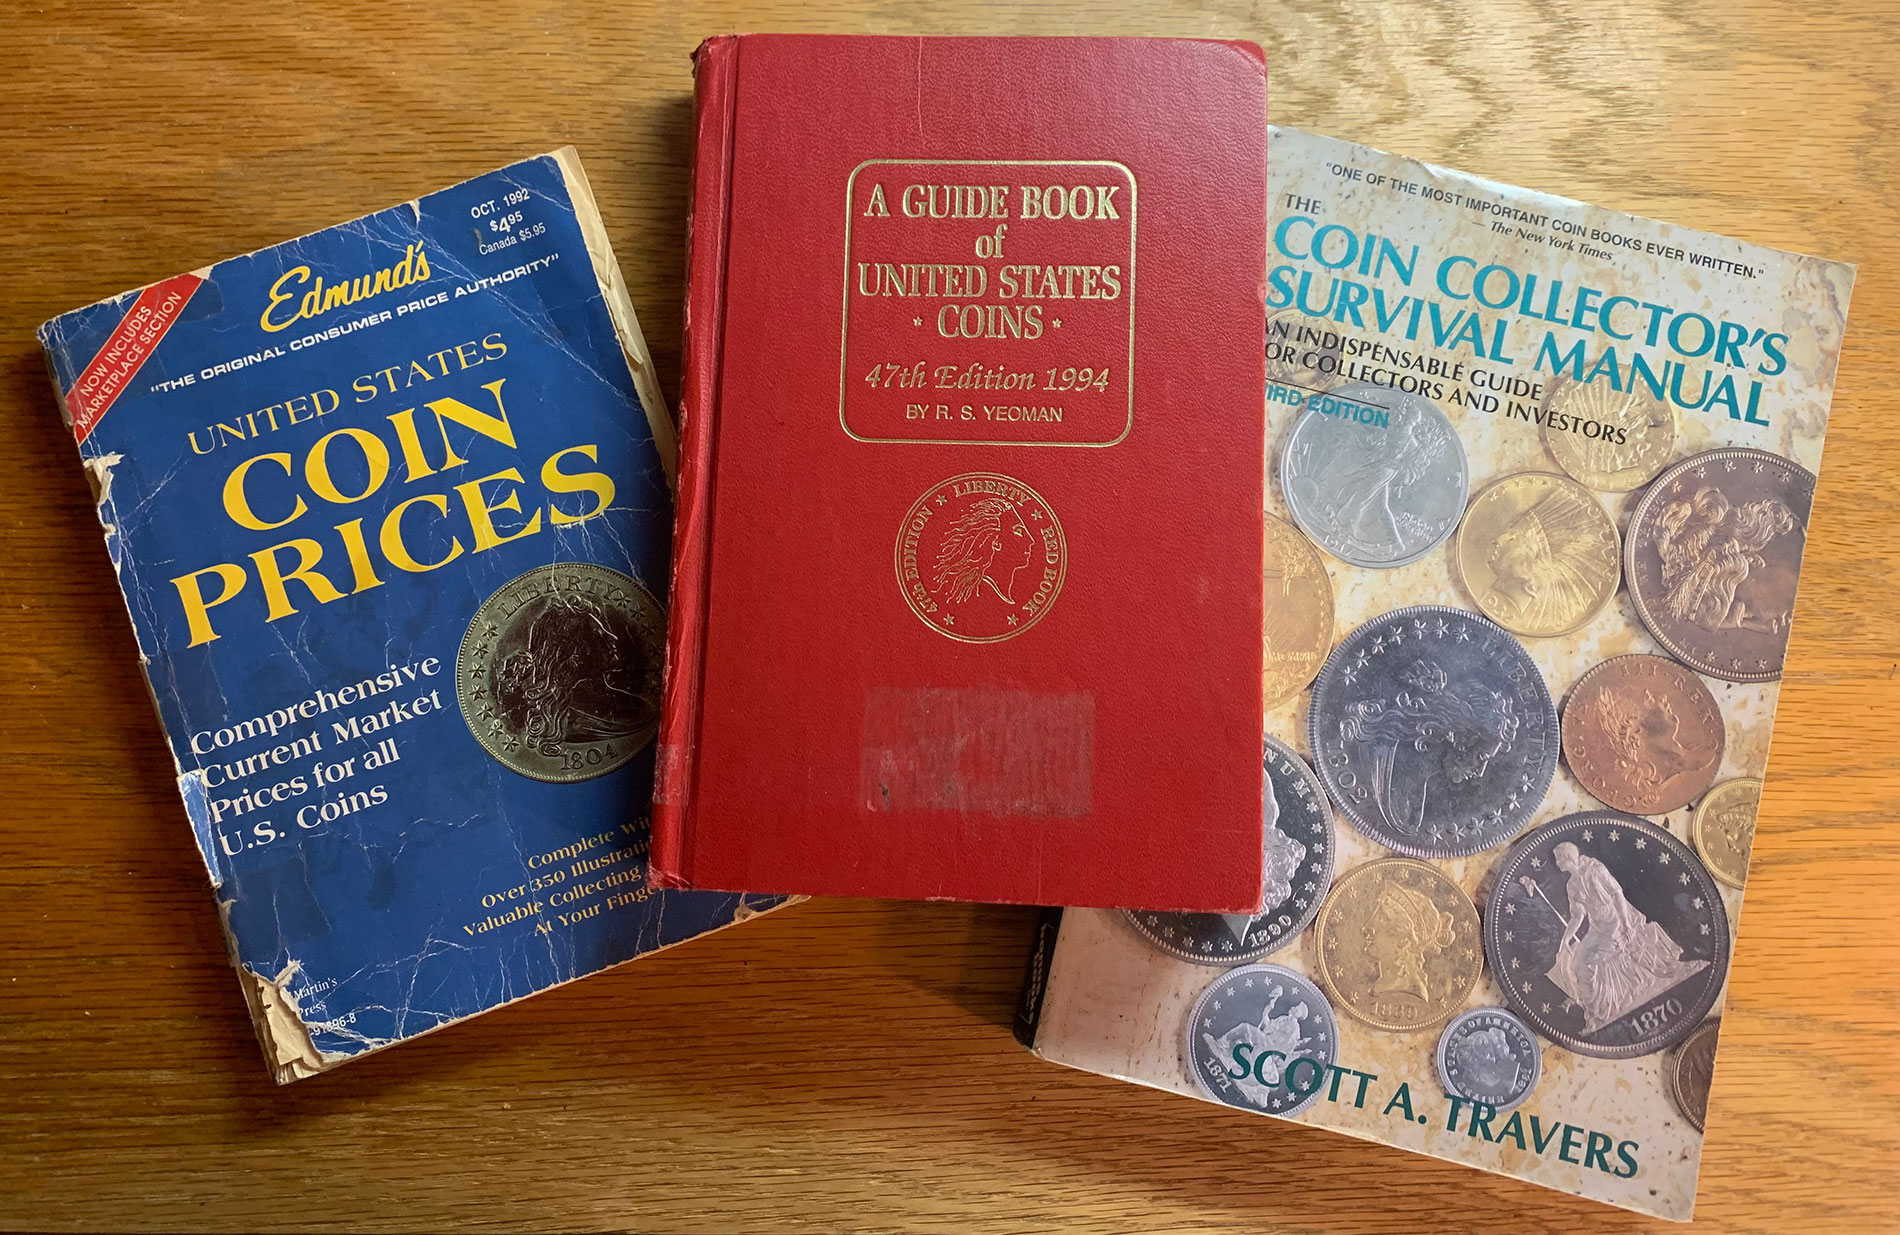 Old or new, books worth buying - Numismatic News